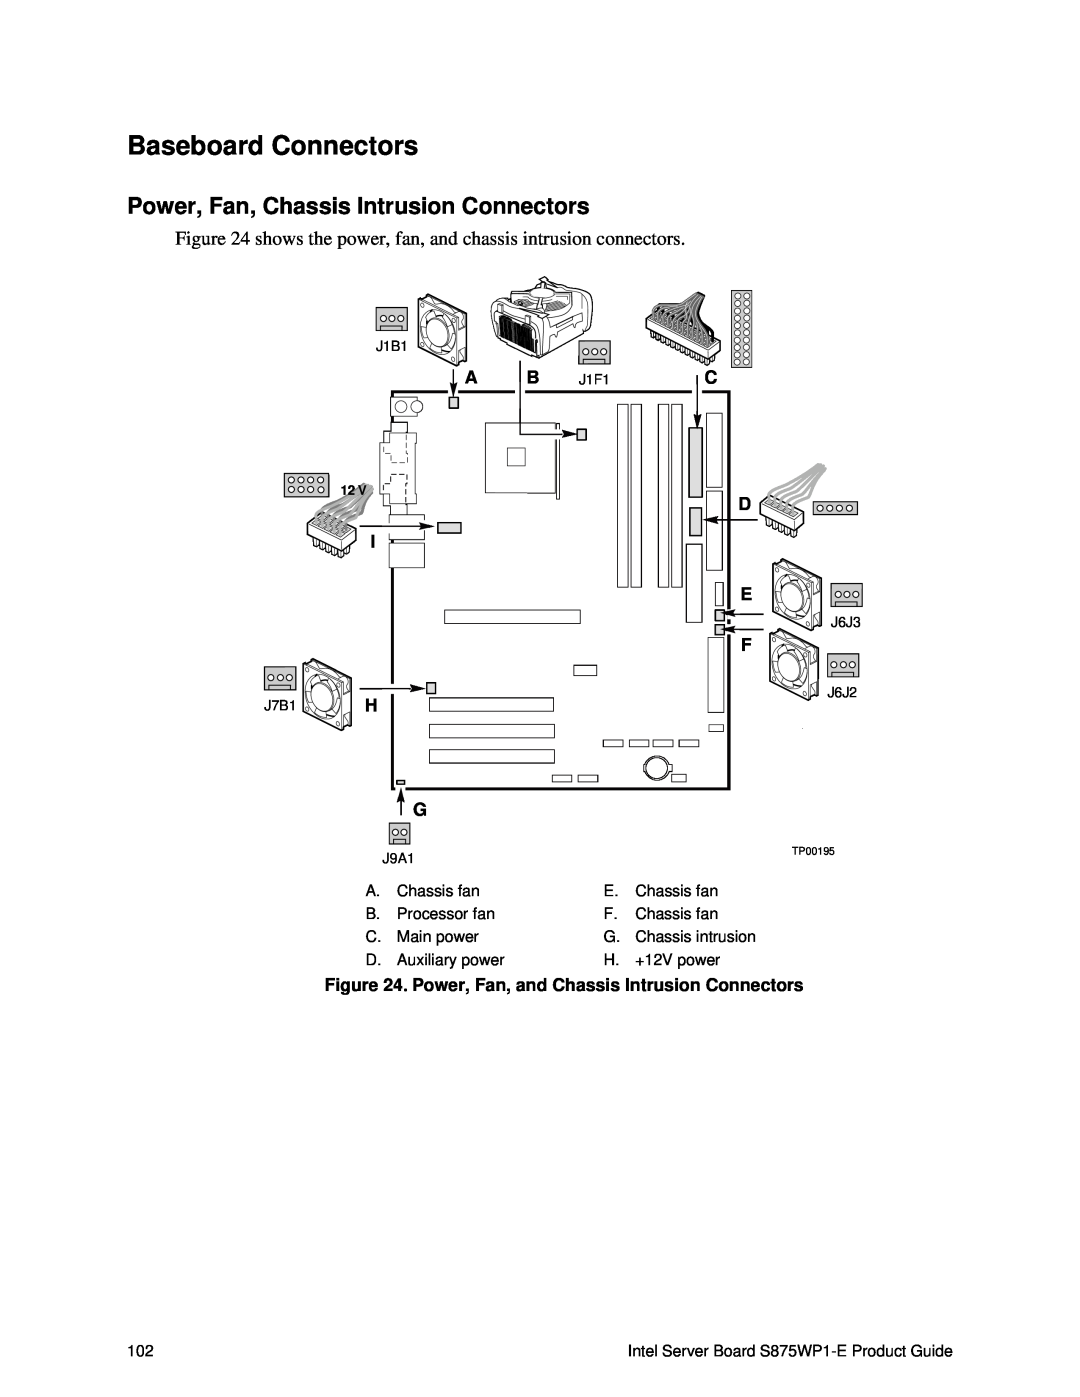 Intel S875WP1-E manual Baseboard Connectors, Power, Fan, Chassis Intrusion Connectors 